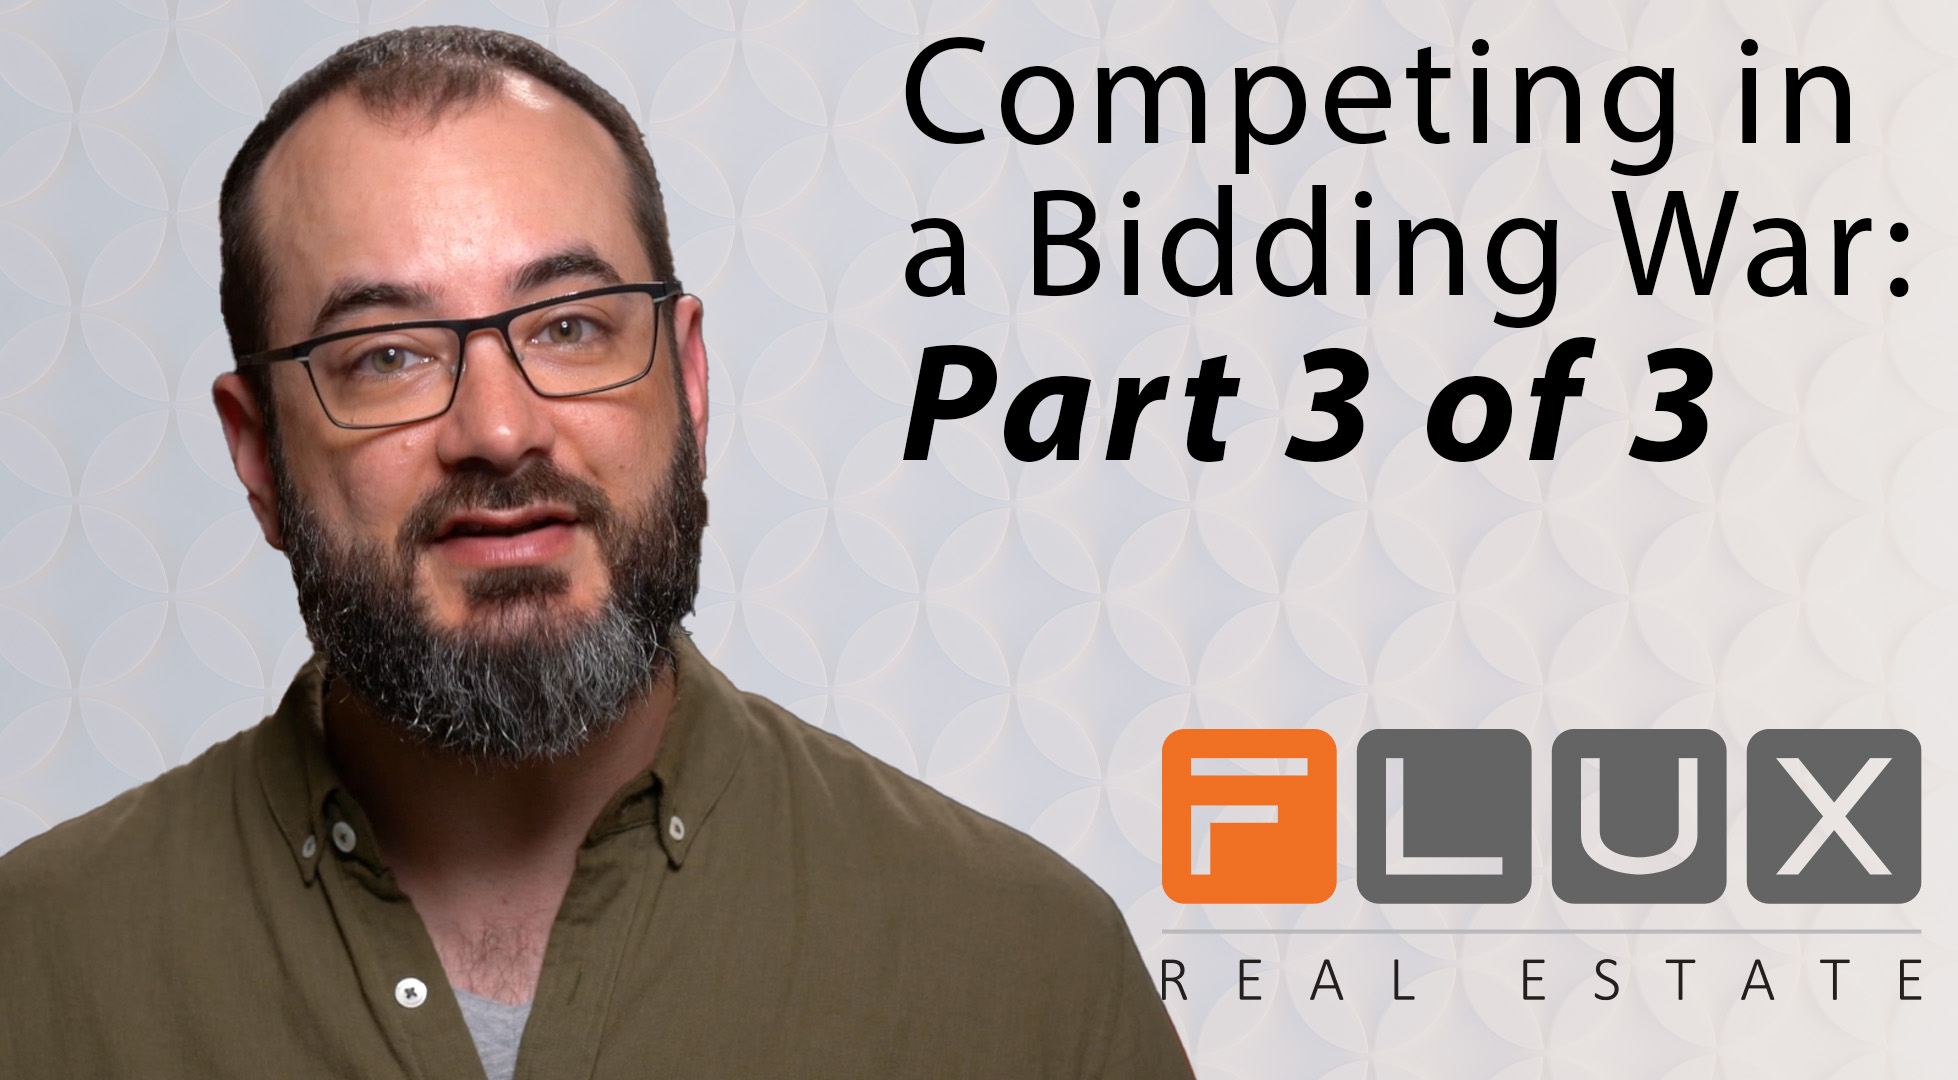 How To Compete in a Bidding War, Part 3